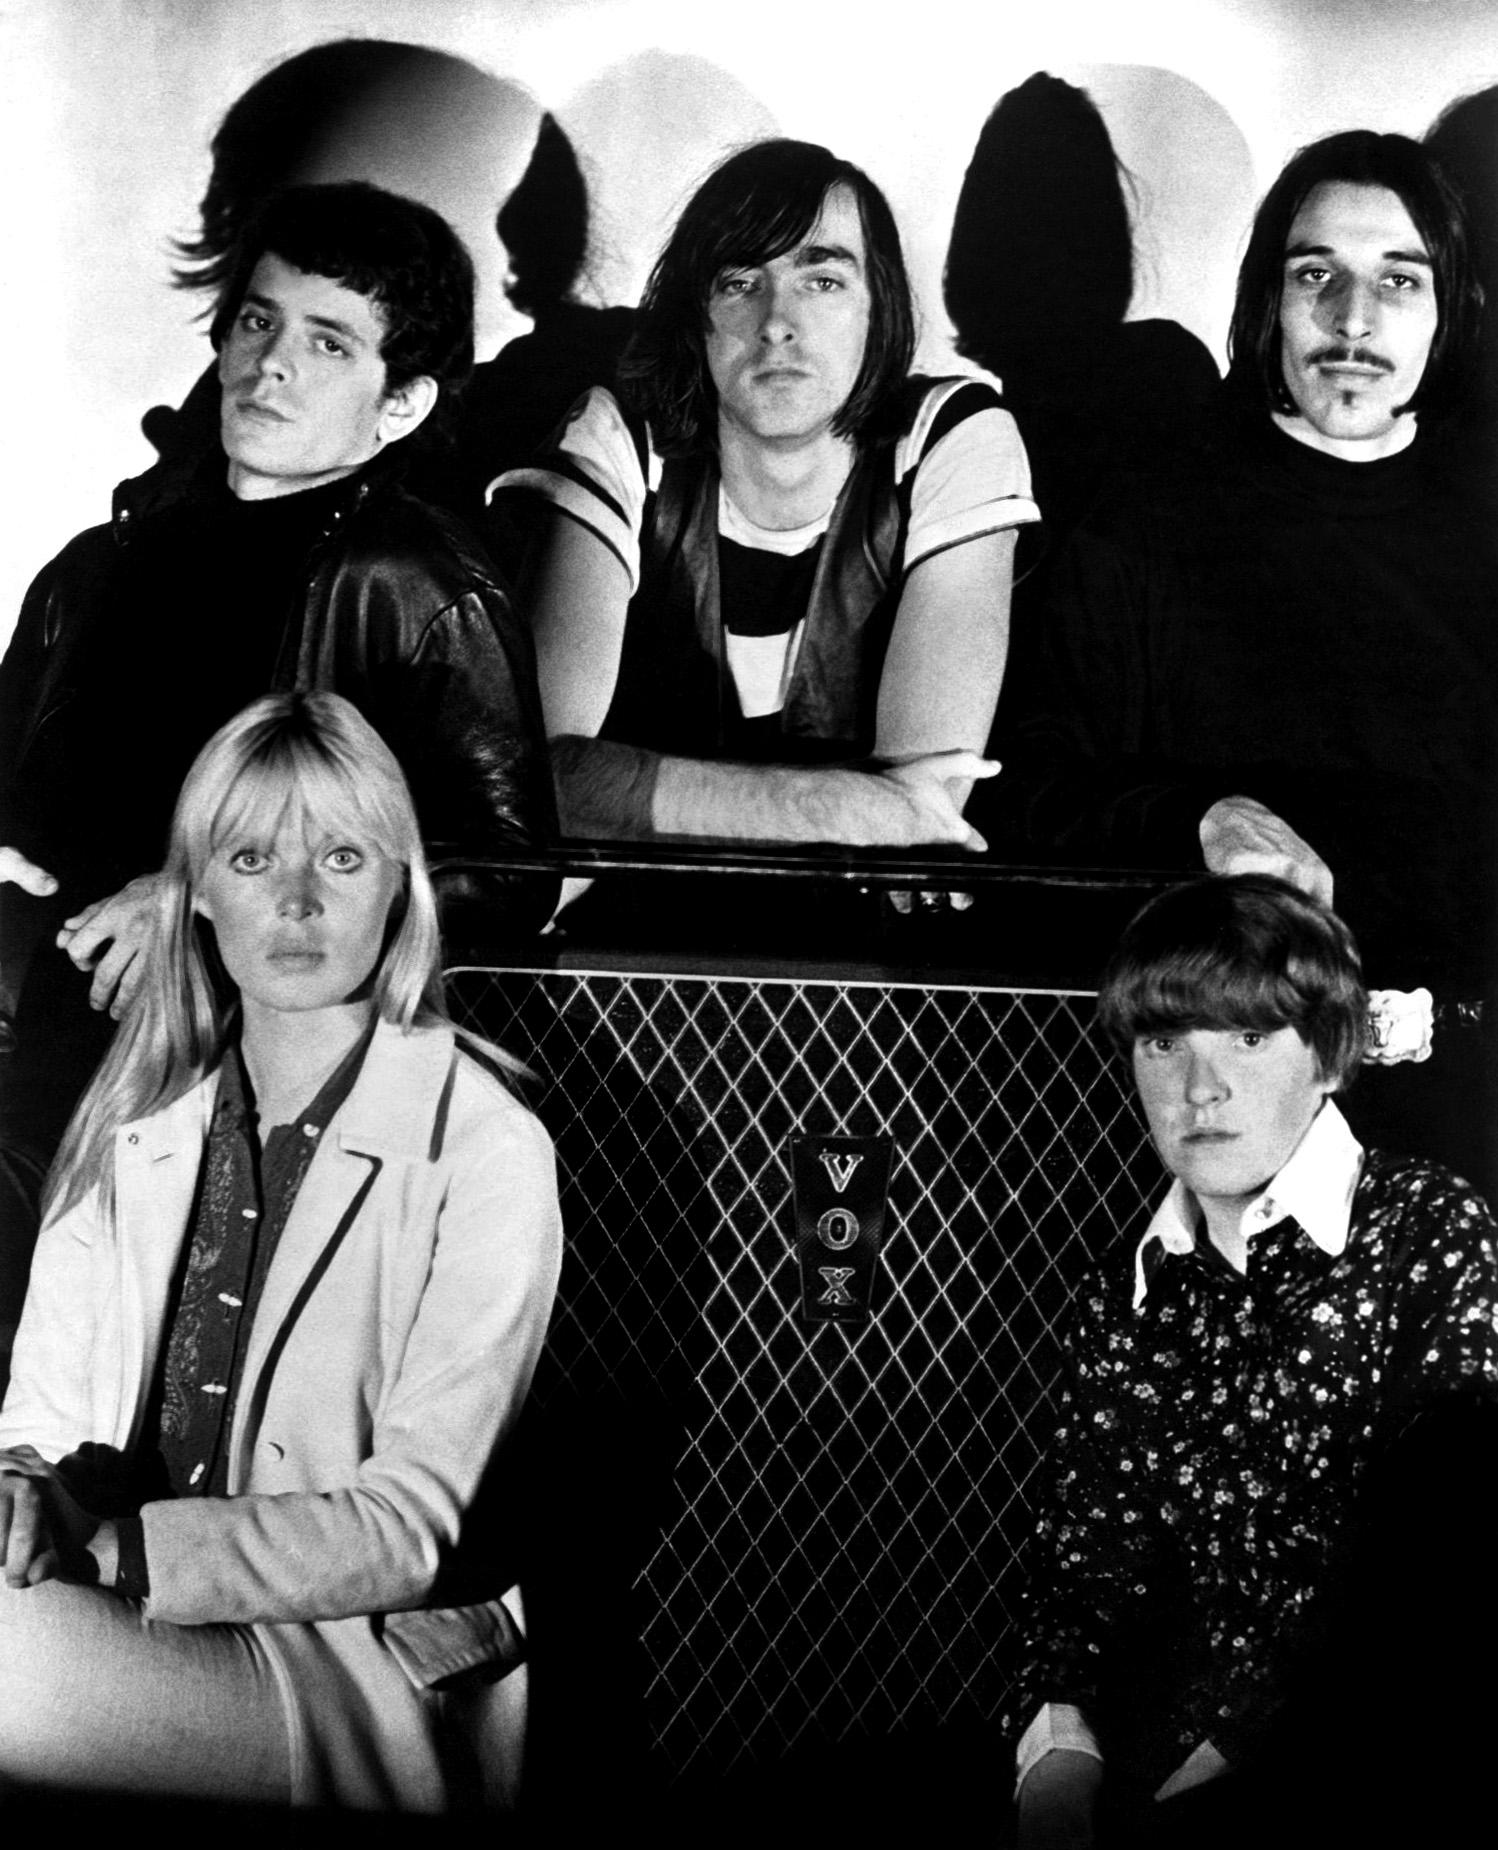 The Velvet Underground: The band that made an art of being obscure